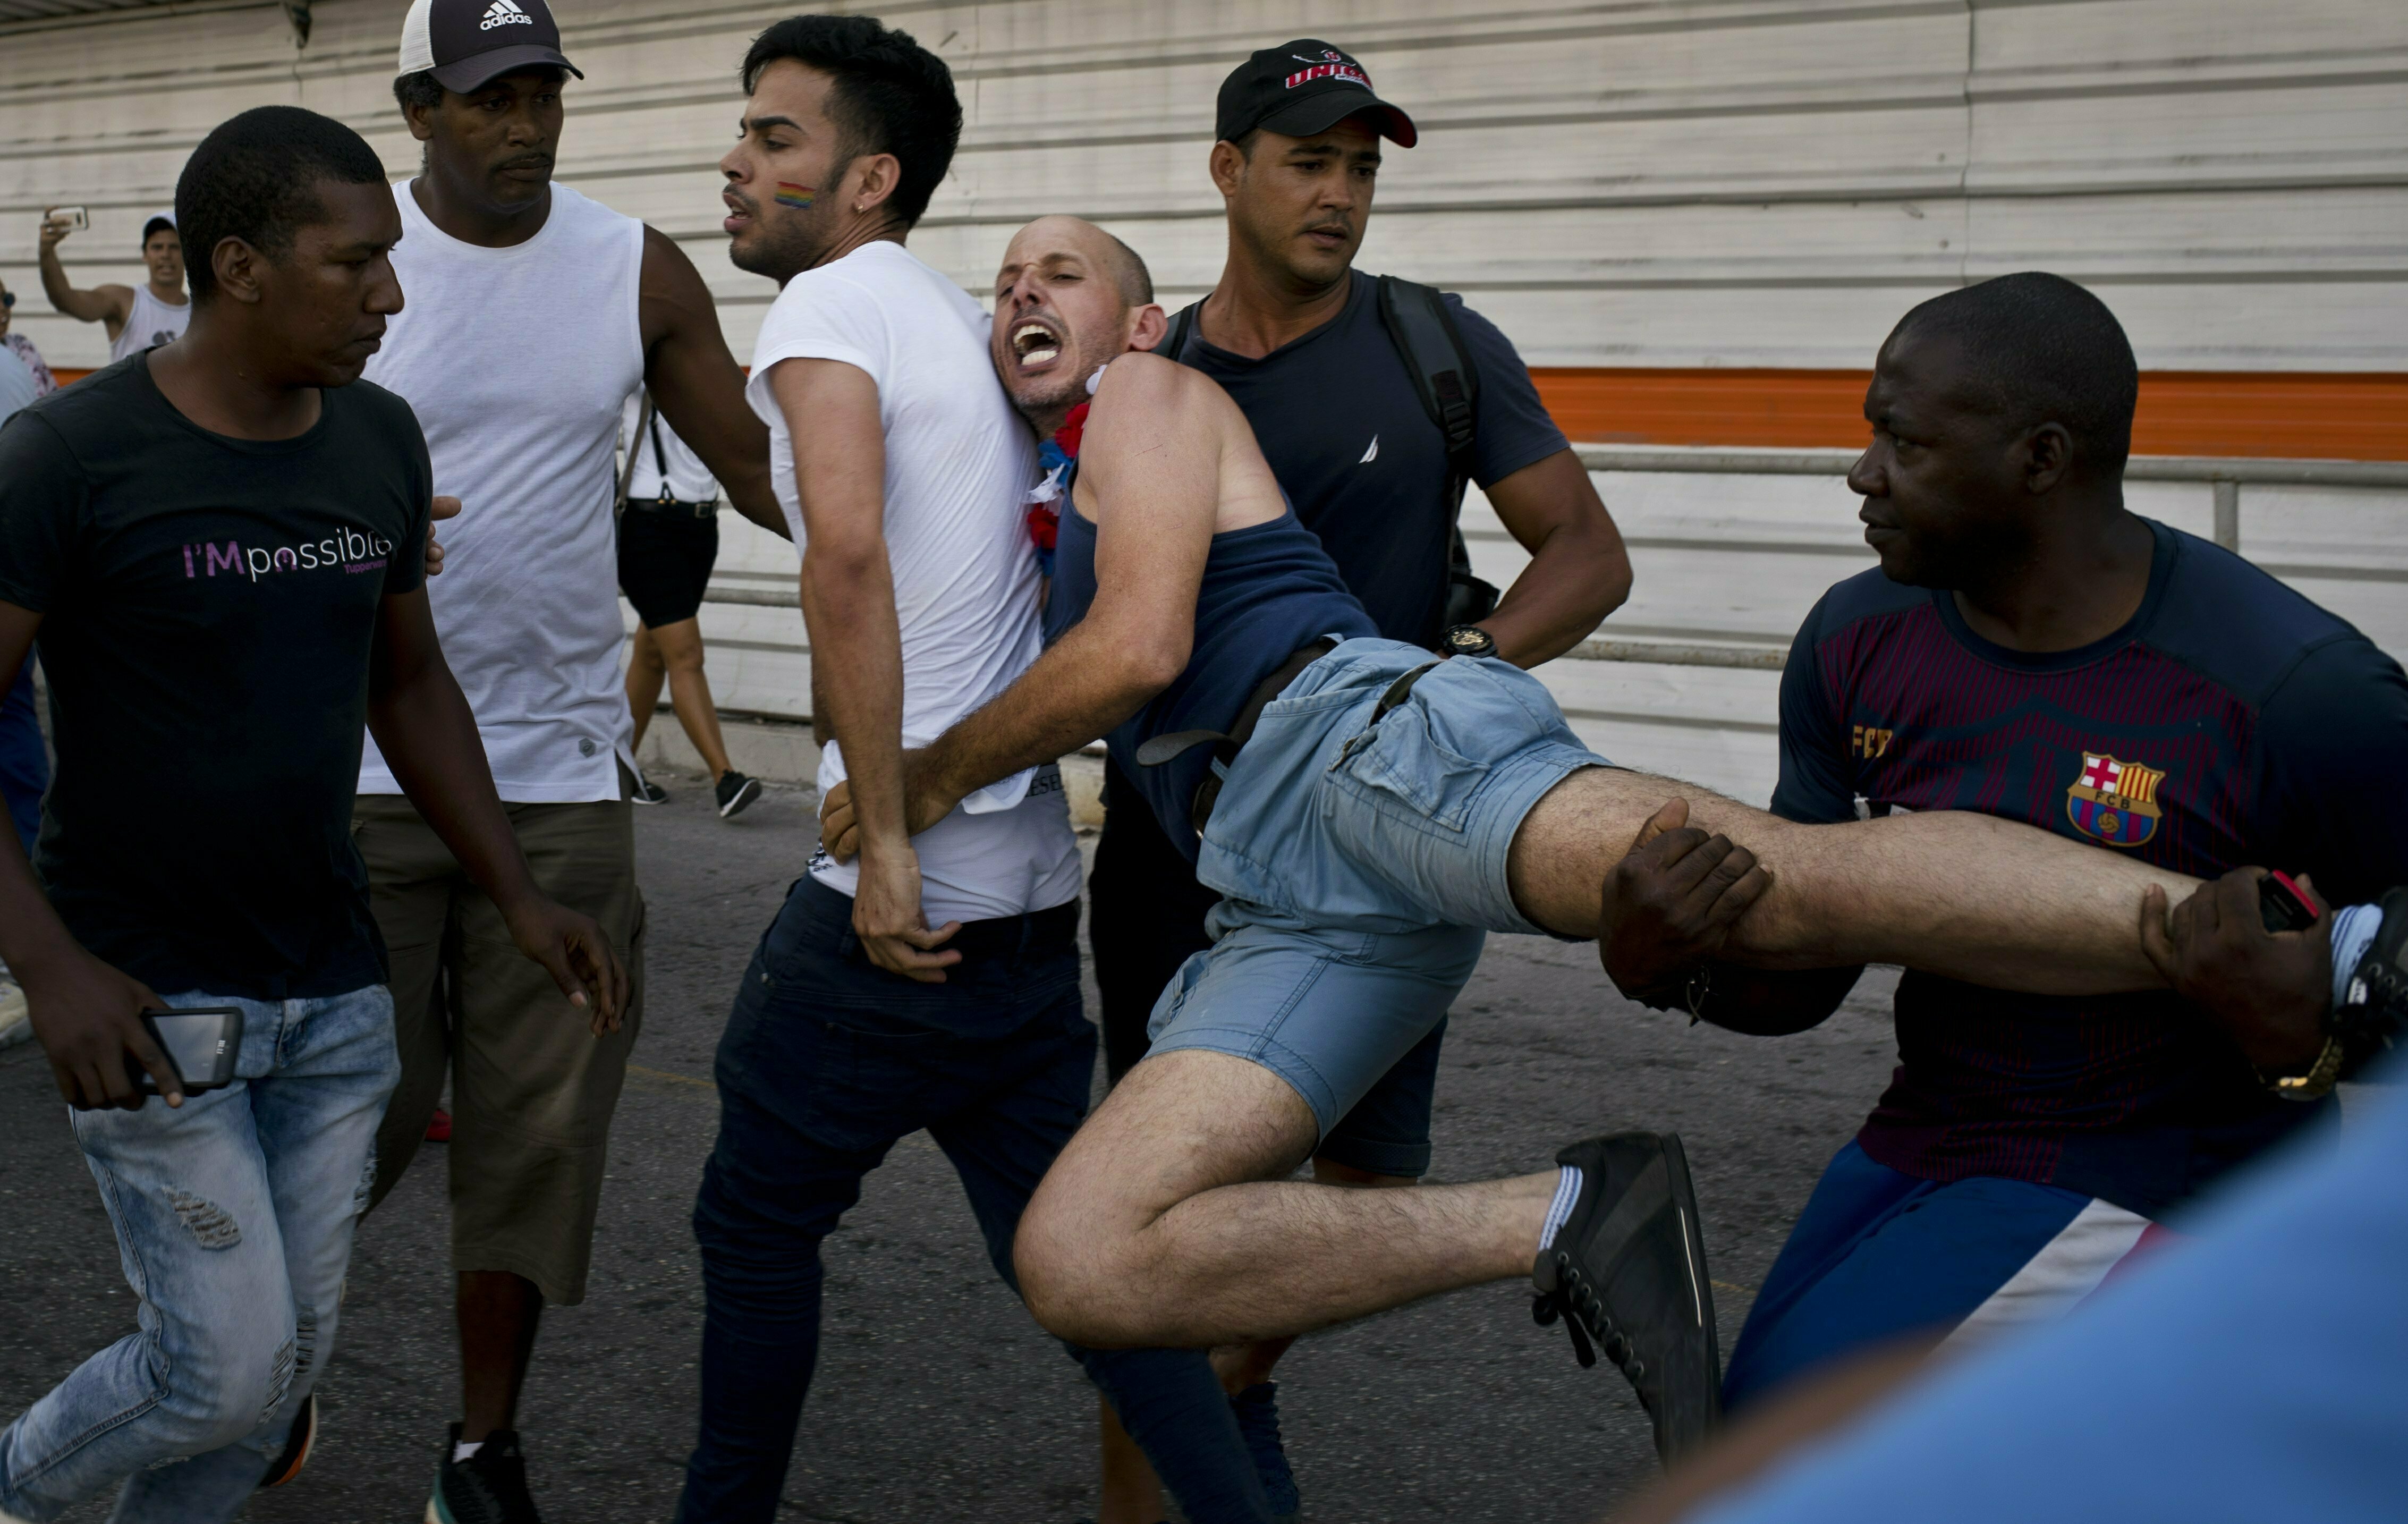 Cuban gay rights groups hold unauthorized march in Havana